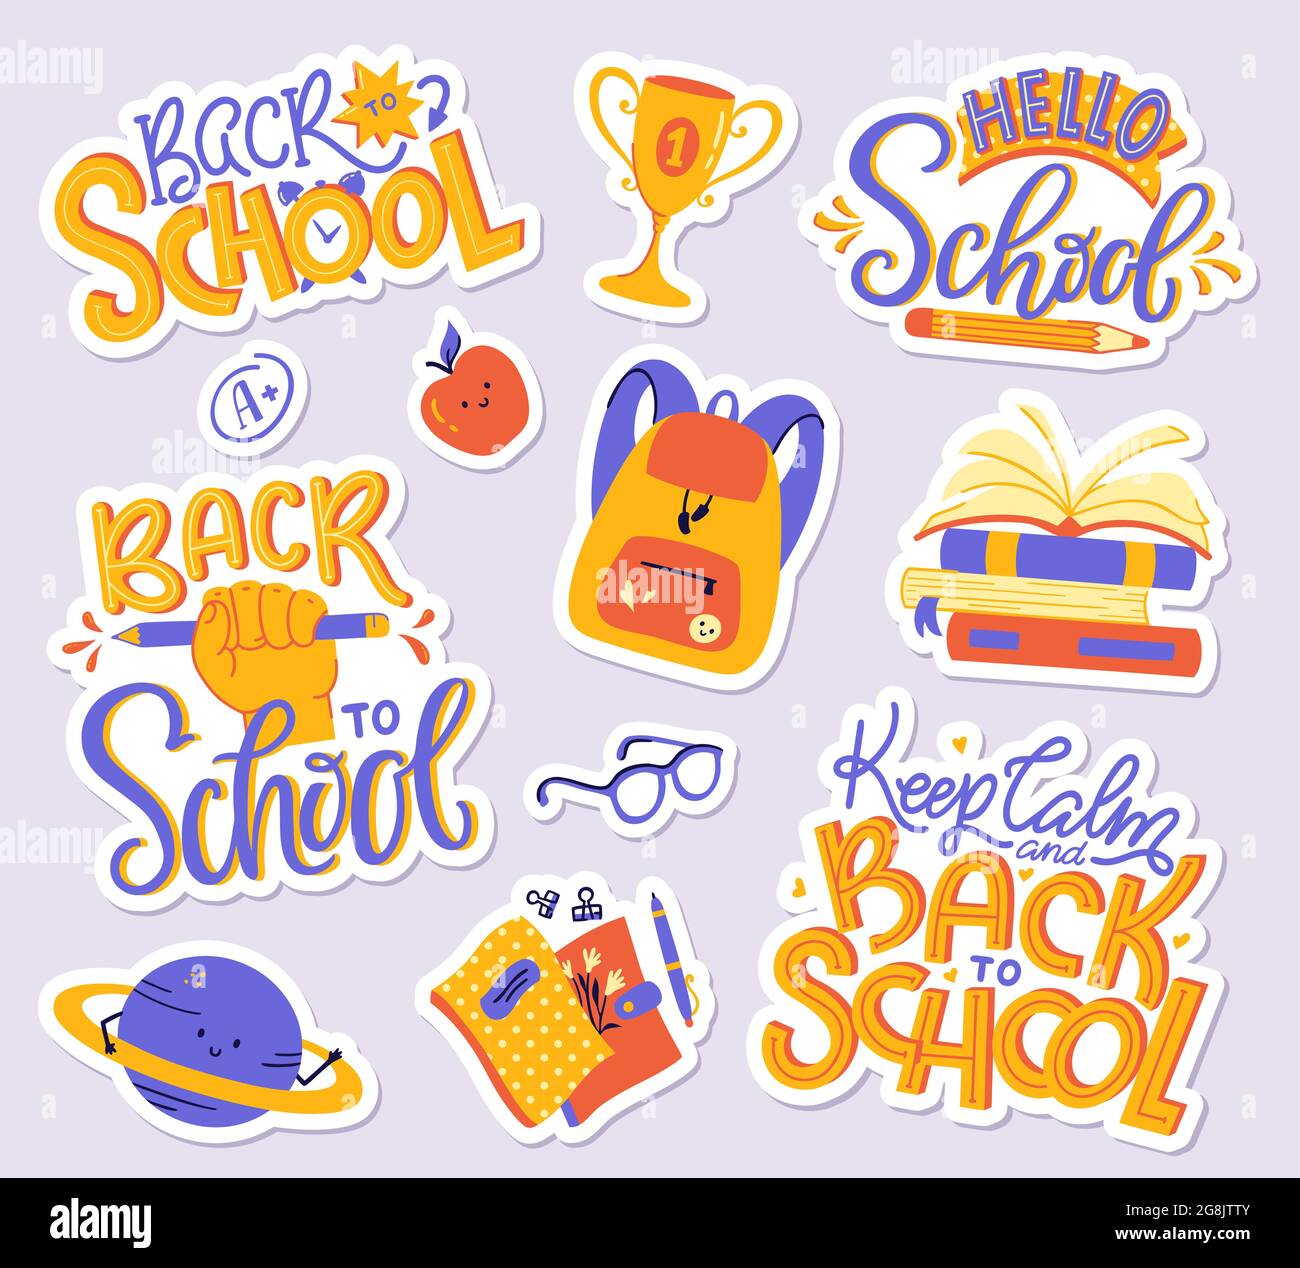 School sticker pack - books, copybooks, backpack, planet, apple, glasses, A+ grade mark, cup. Back to School hand letterings. Vector set. Stock Vector